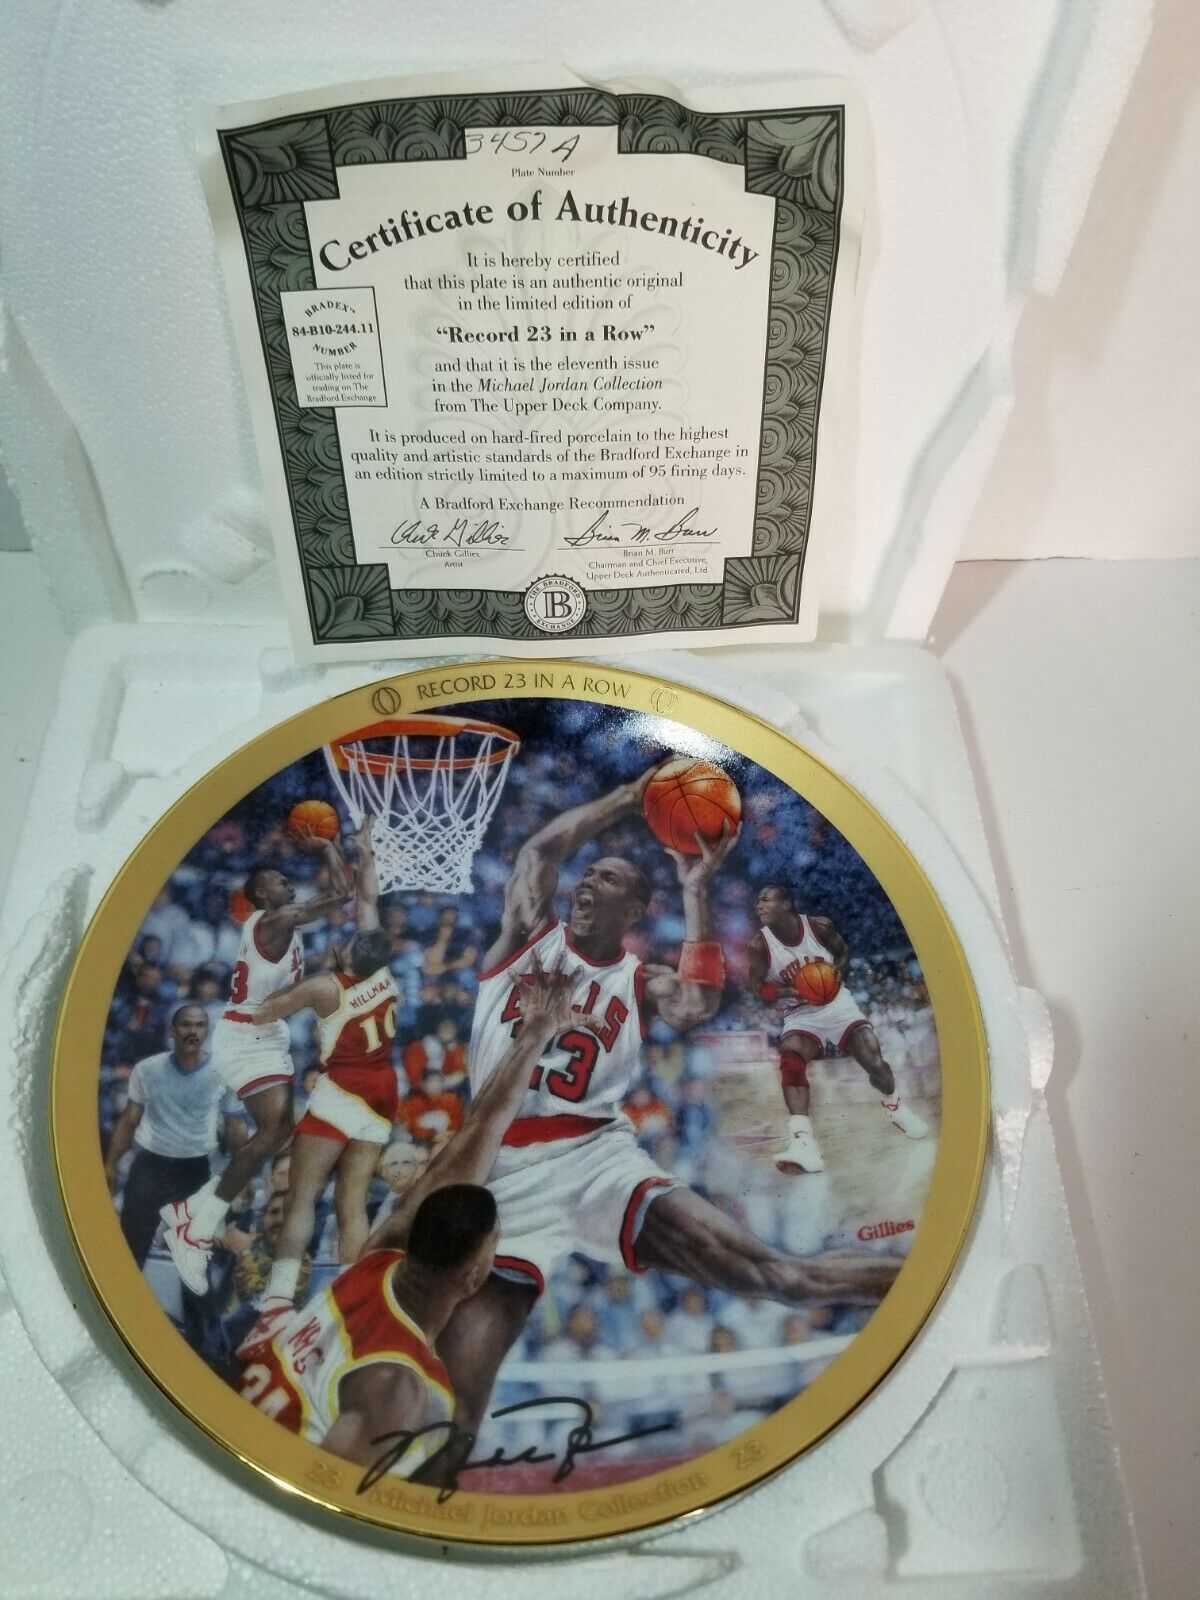 Michael Jordan Collection Plate "record 23 In A Row" Bradford Exchange Plate Coa